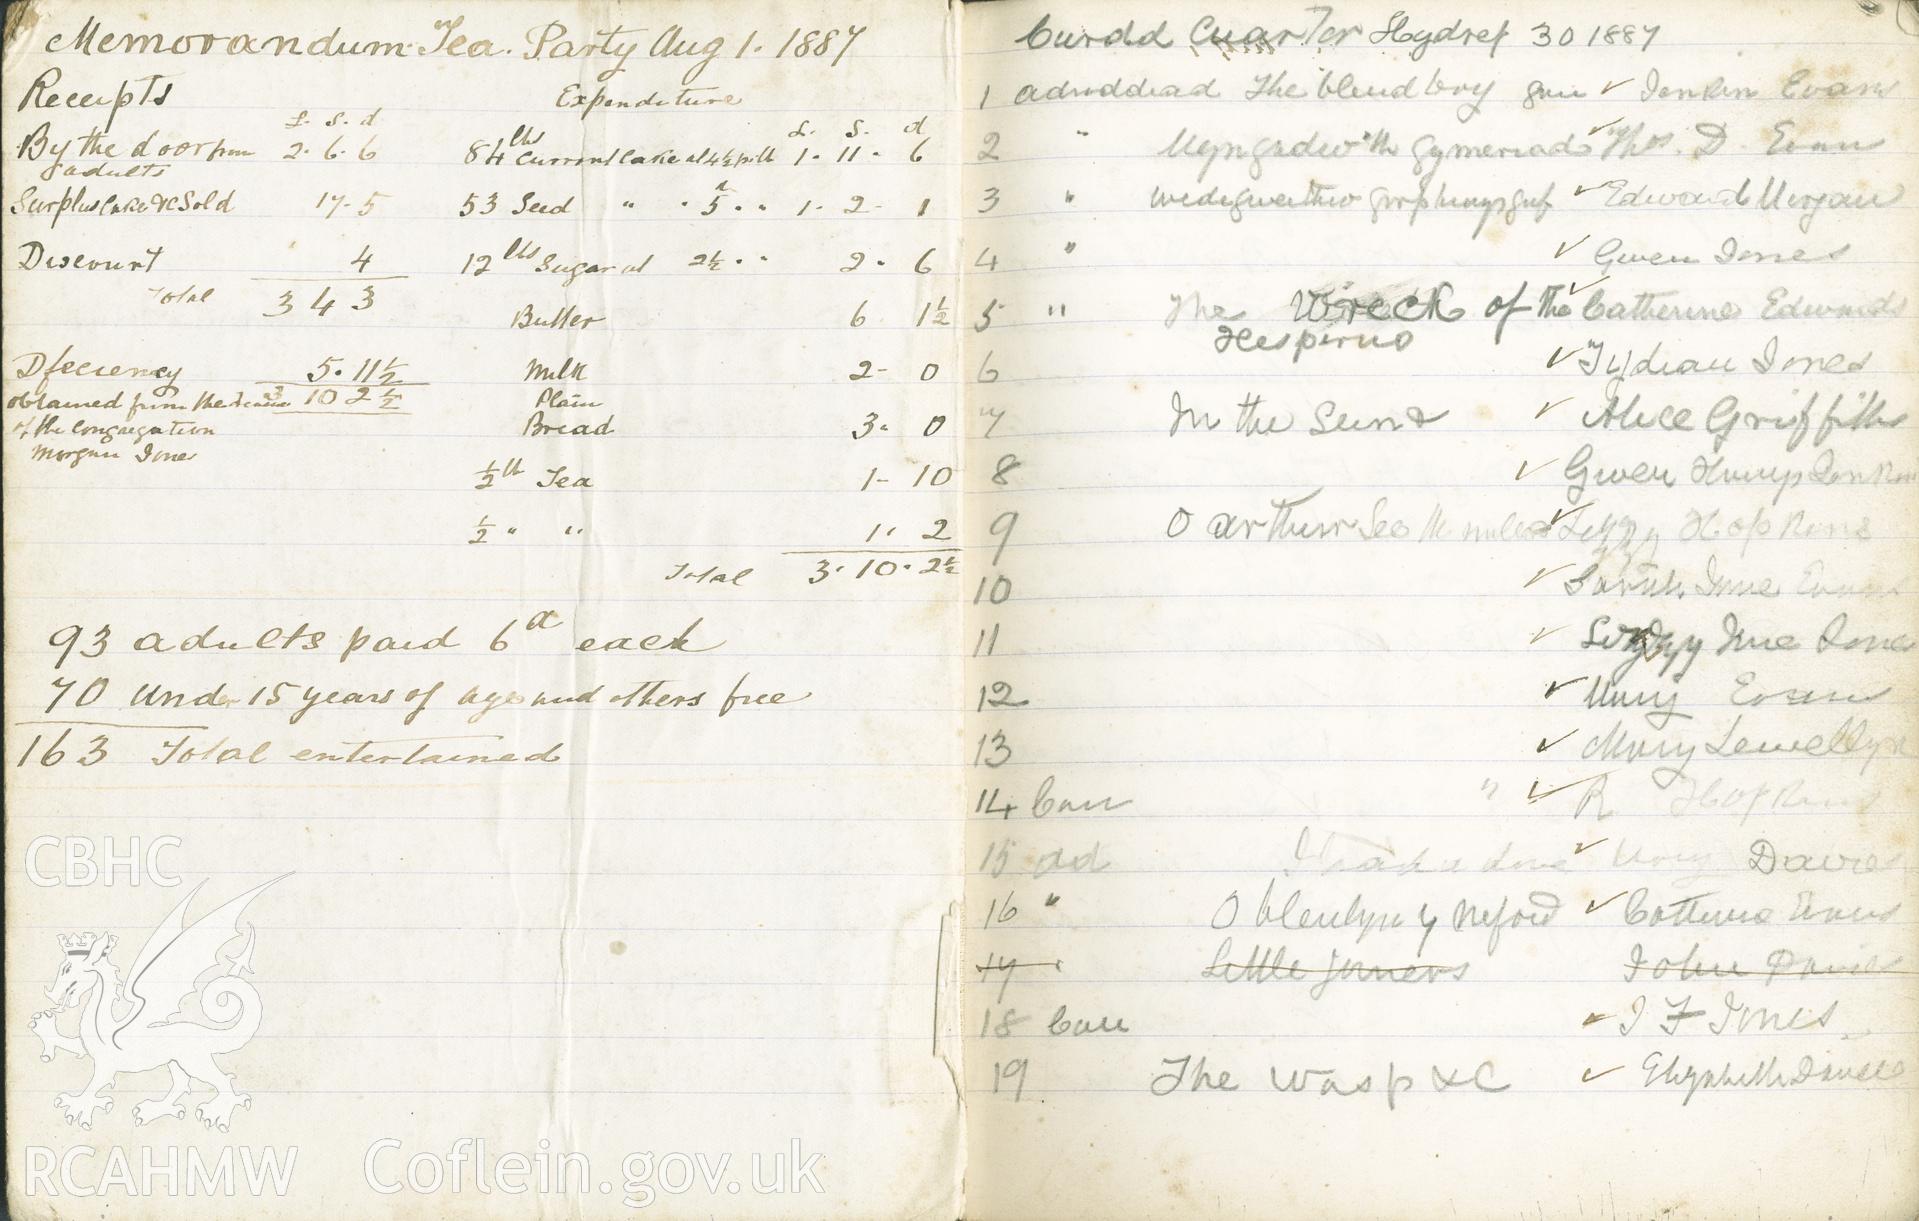 Handwritten tea part accounts dated 1st August 1887. Donated by the Rev. Eric Jones to the RCAHMW as part of the Digital Dissent Project.